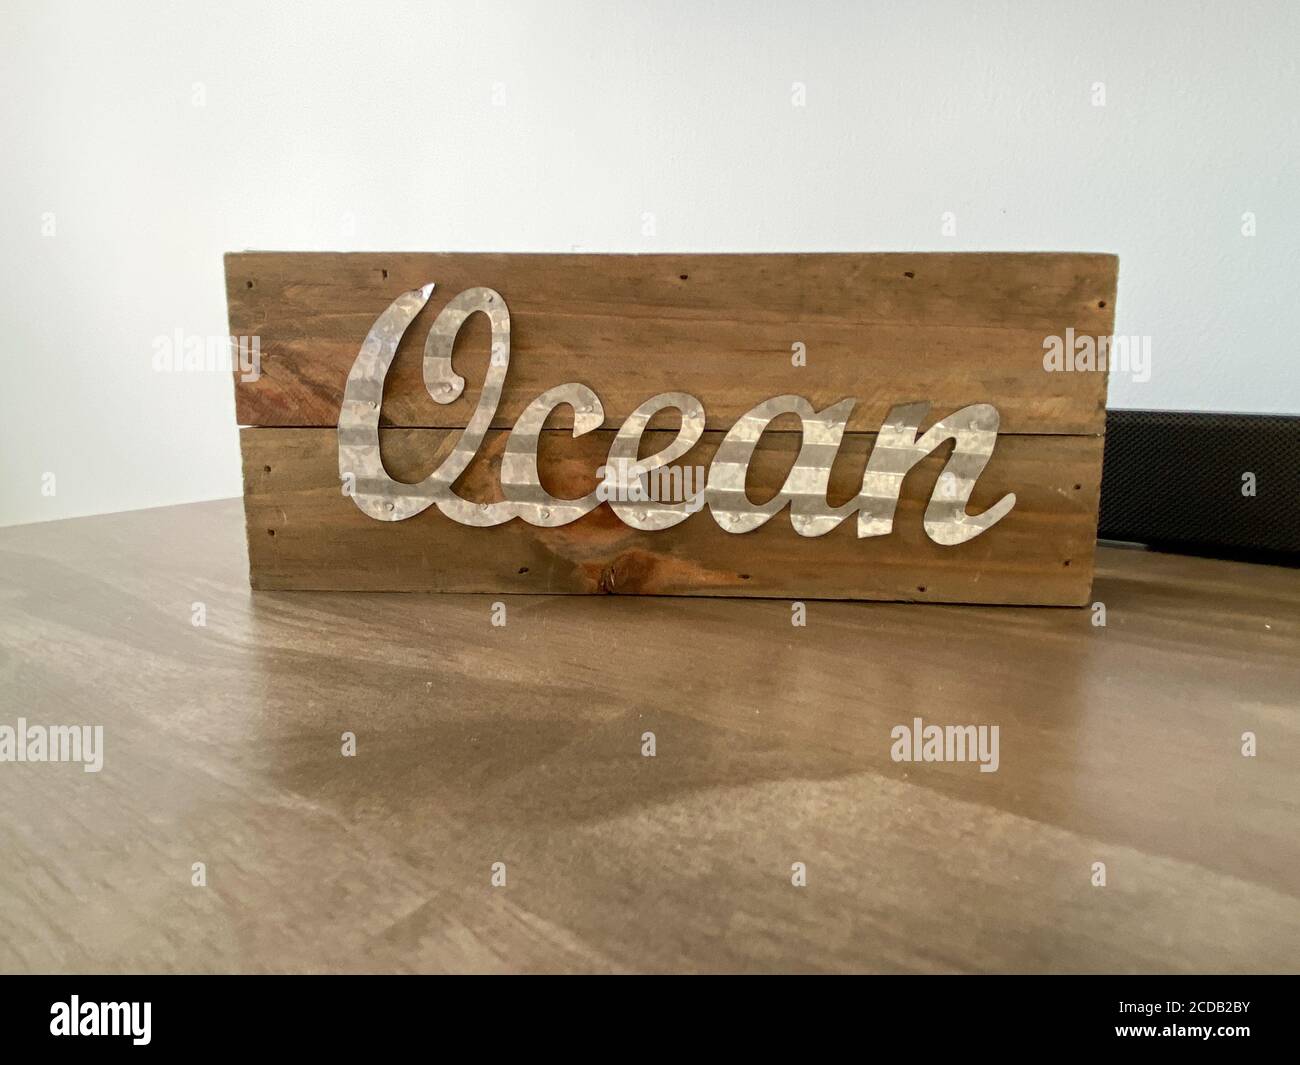 A wooden beach decoration on a table with the word ocean in cursive writing. Stock Photo